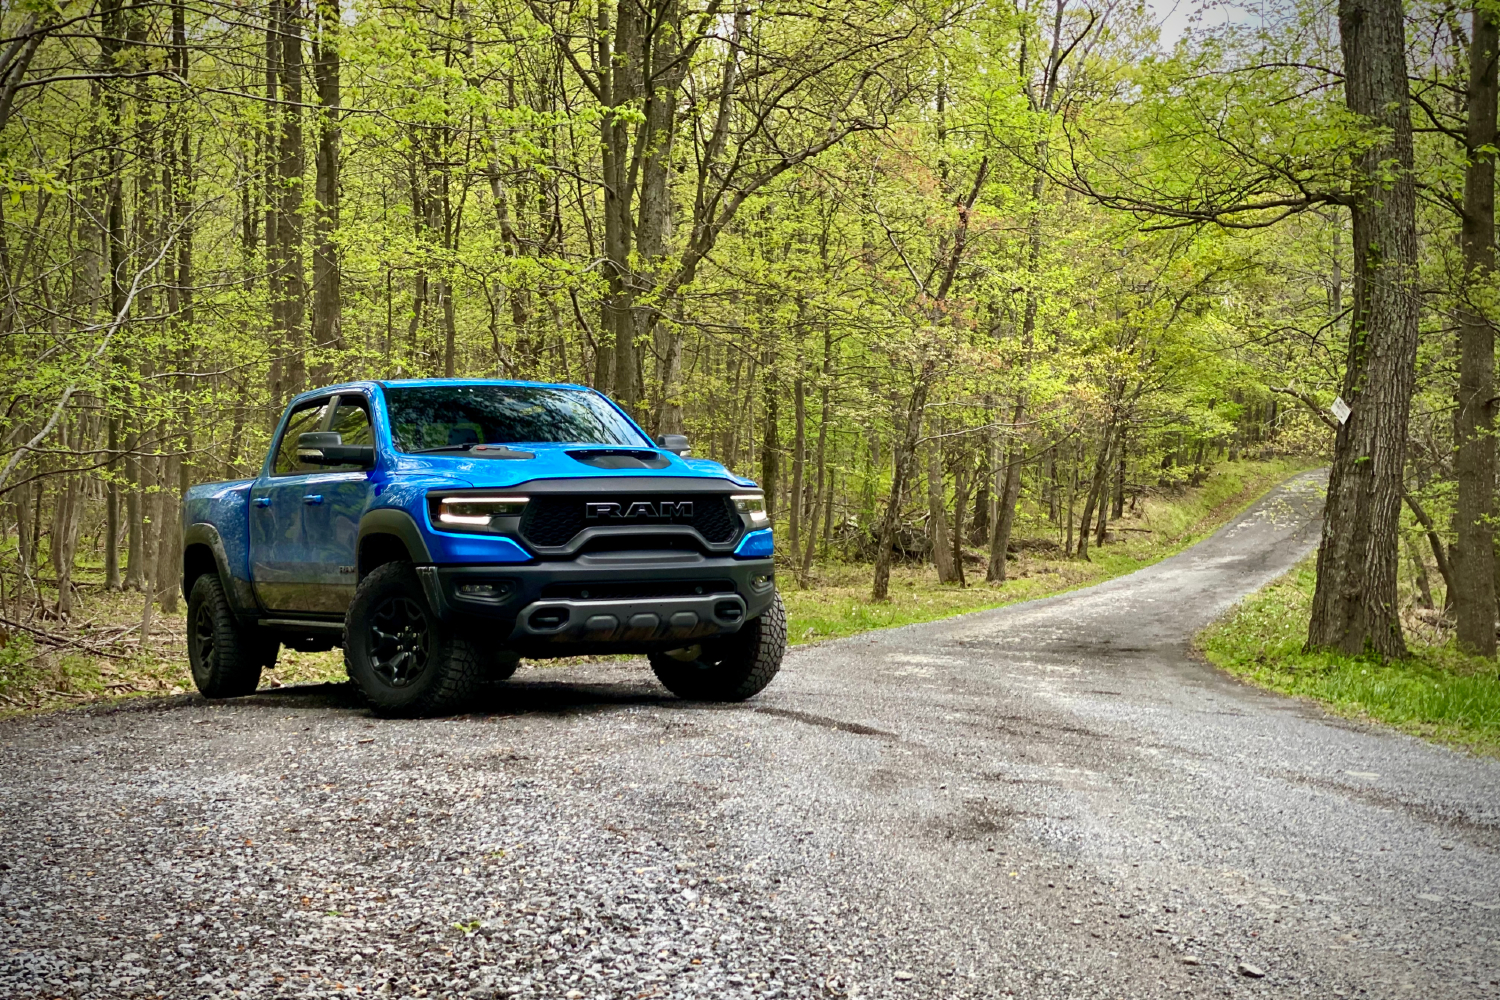 2021 Ram TRX: The Hellcat-Powered, High-Jumping Pickup With 702